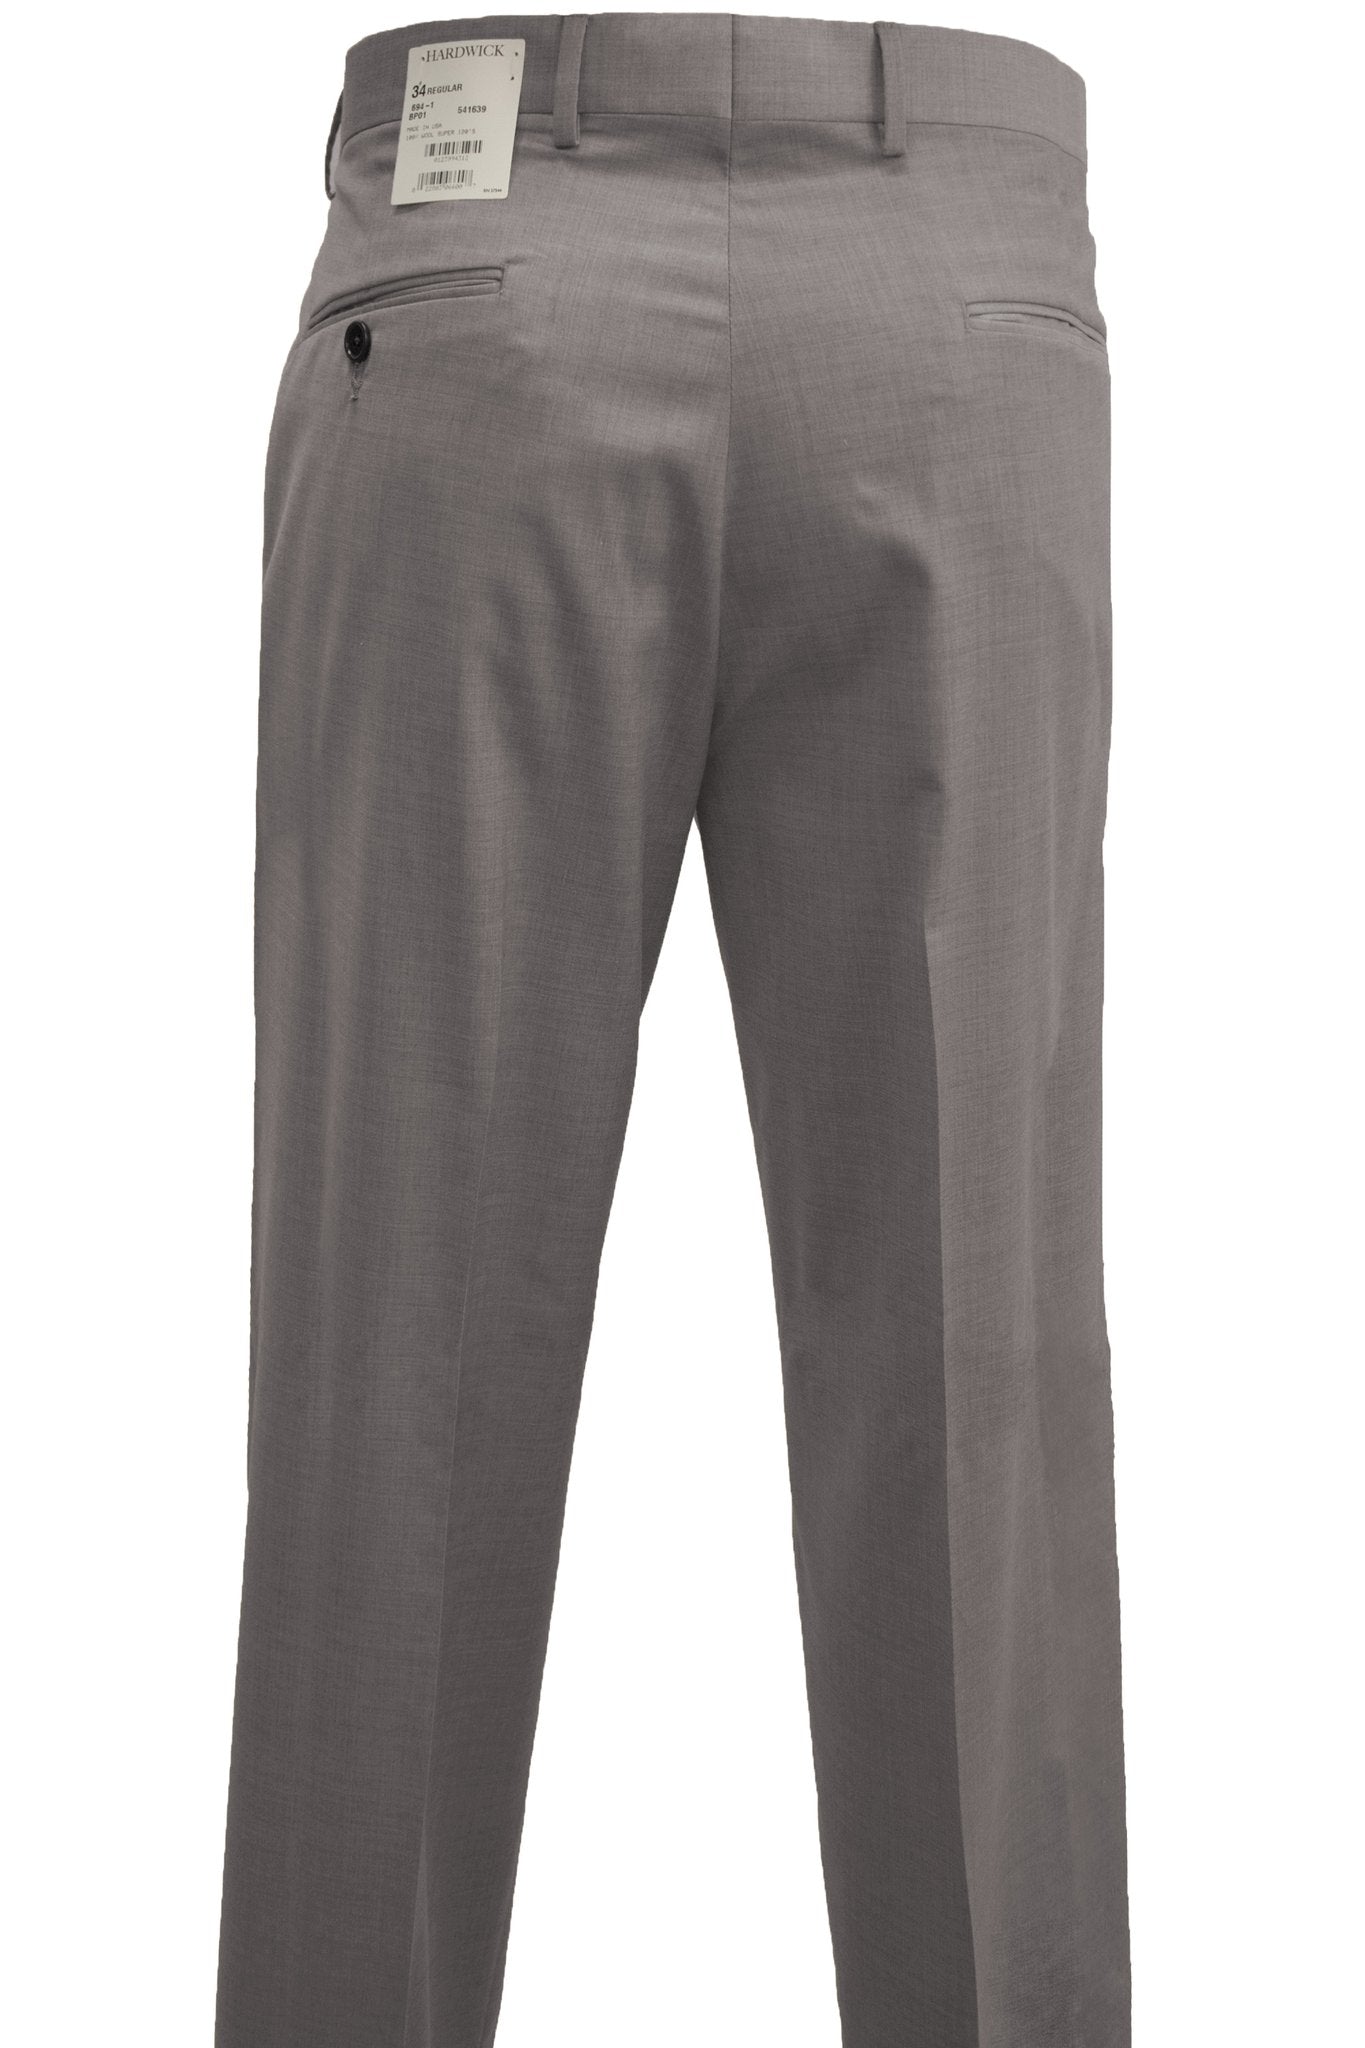 Modern Fit Gray Super 120's Wool Flat Front Dress Pant Made in USA –